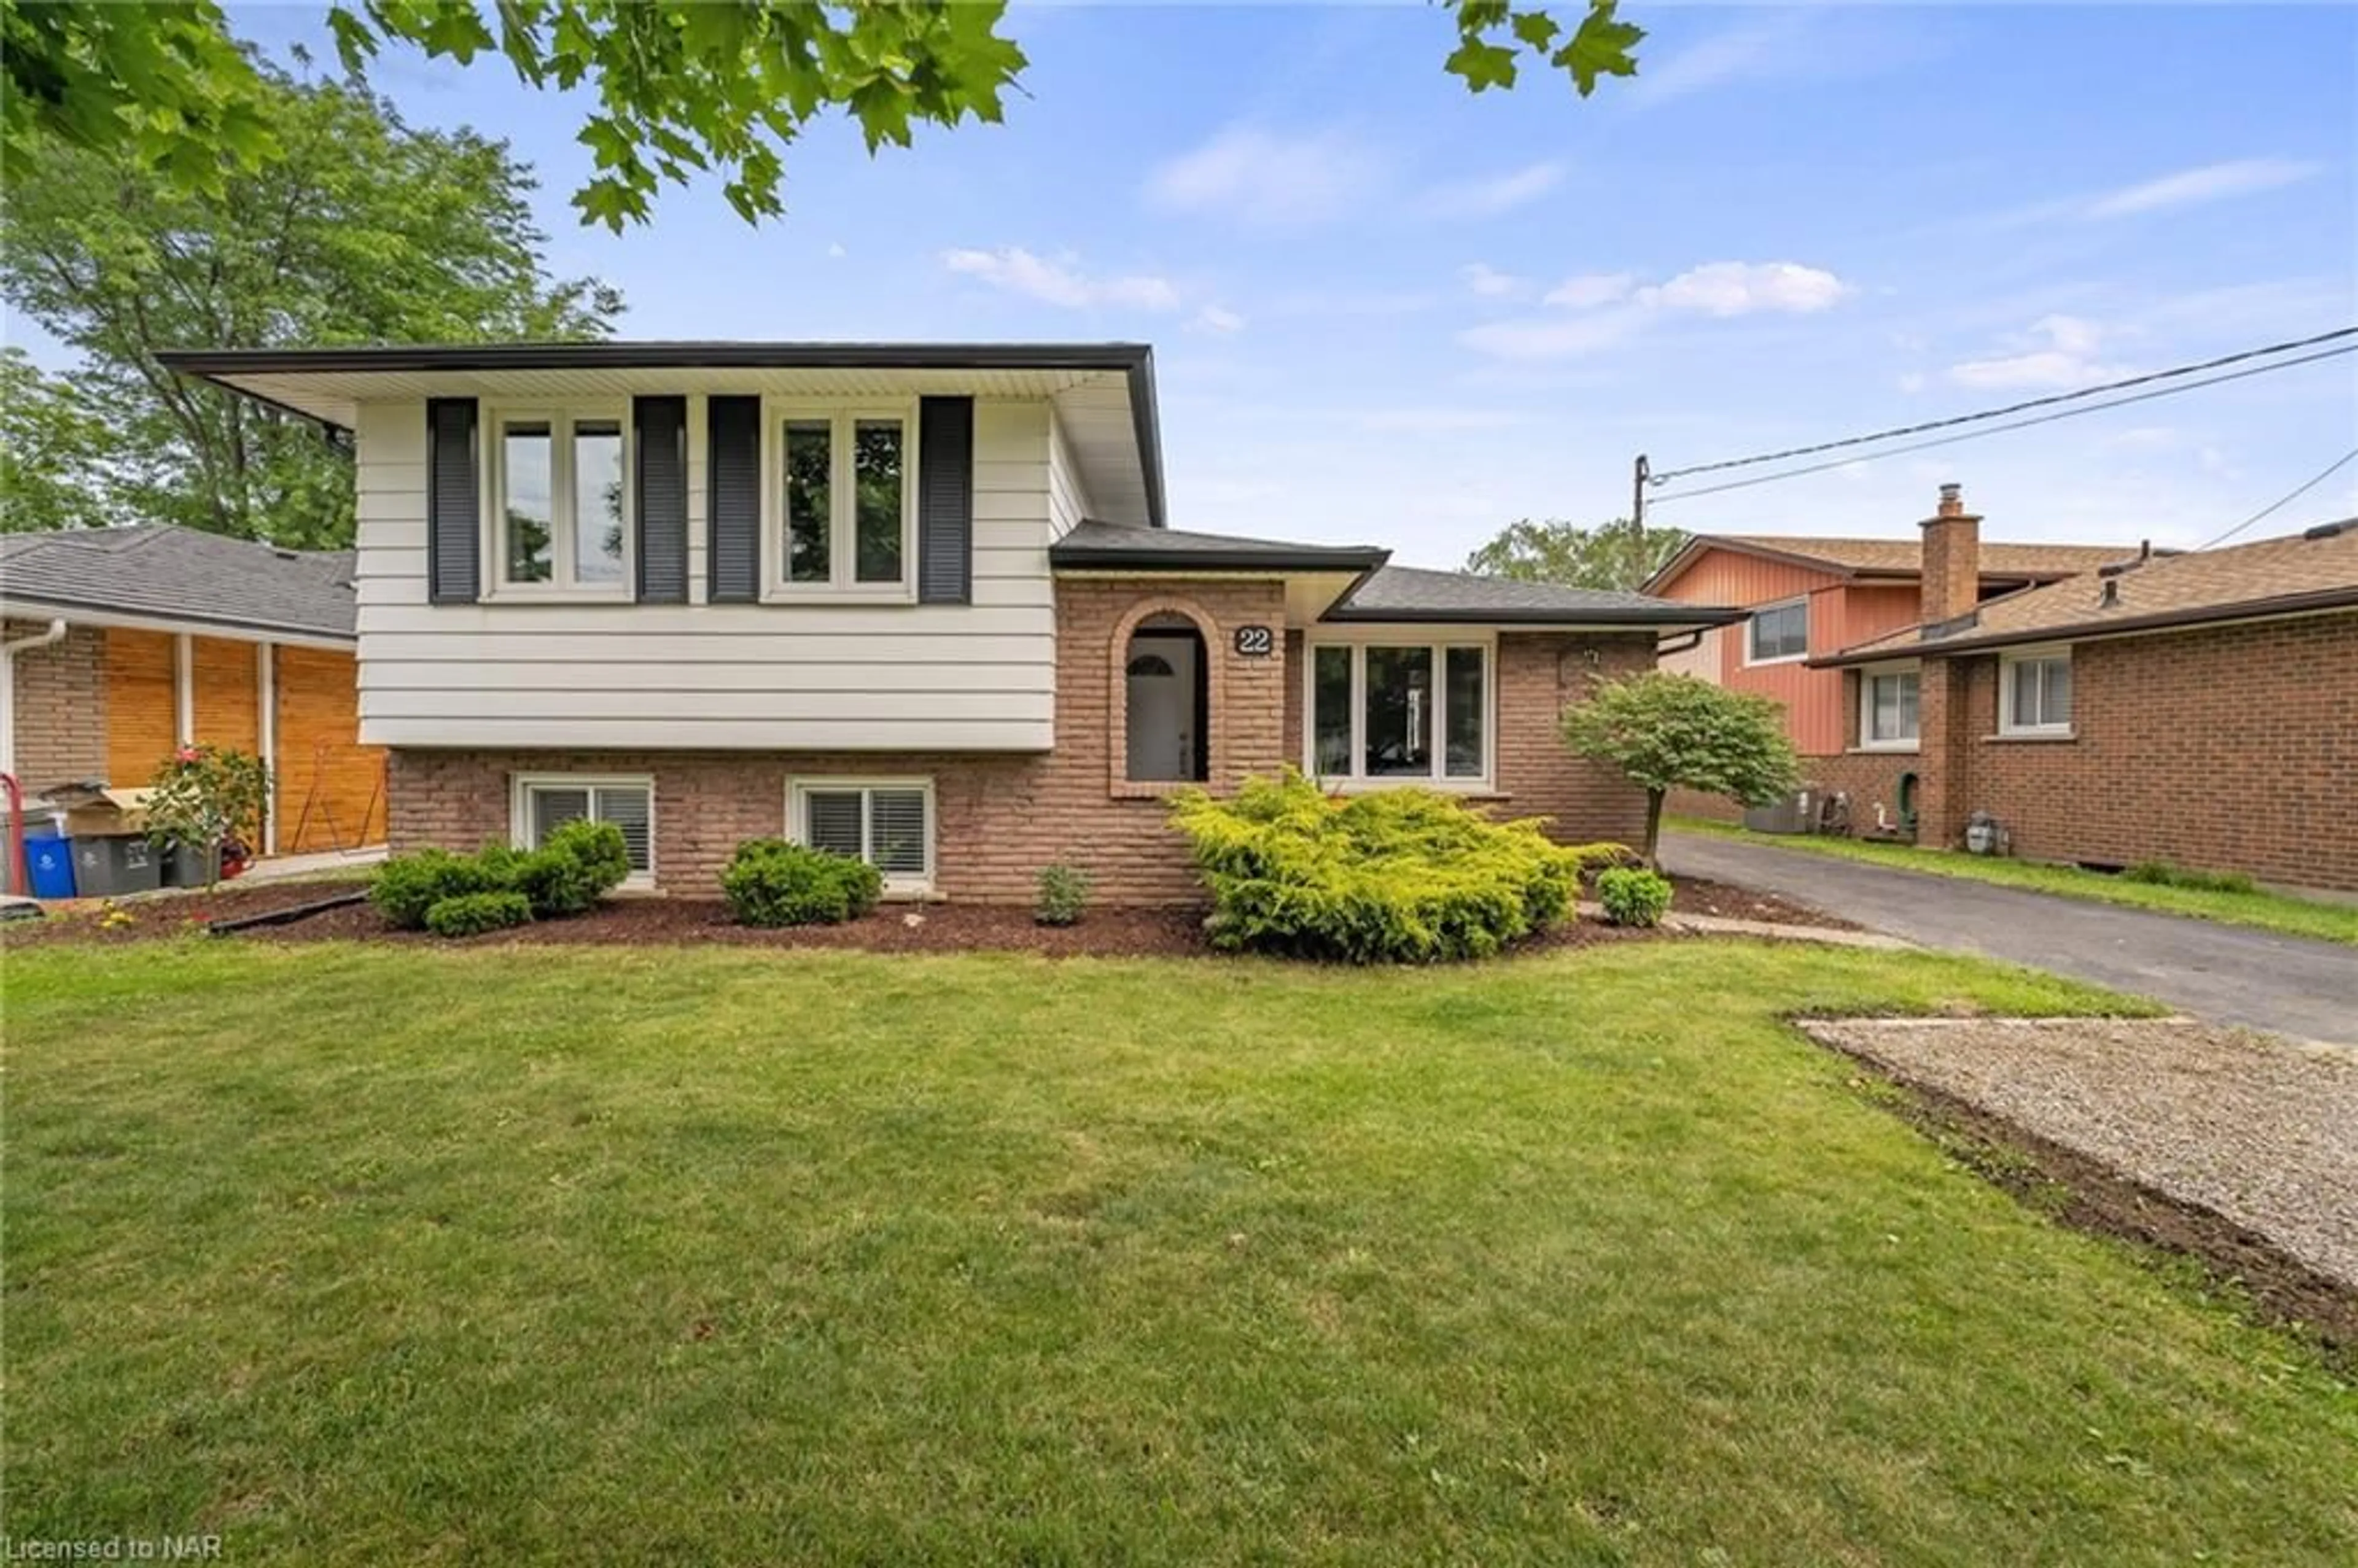 Home with brick exterior material for 22 Sherman Dr, St. Catharines Ontario L2N 2L4